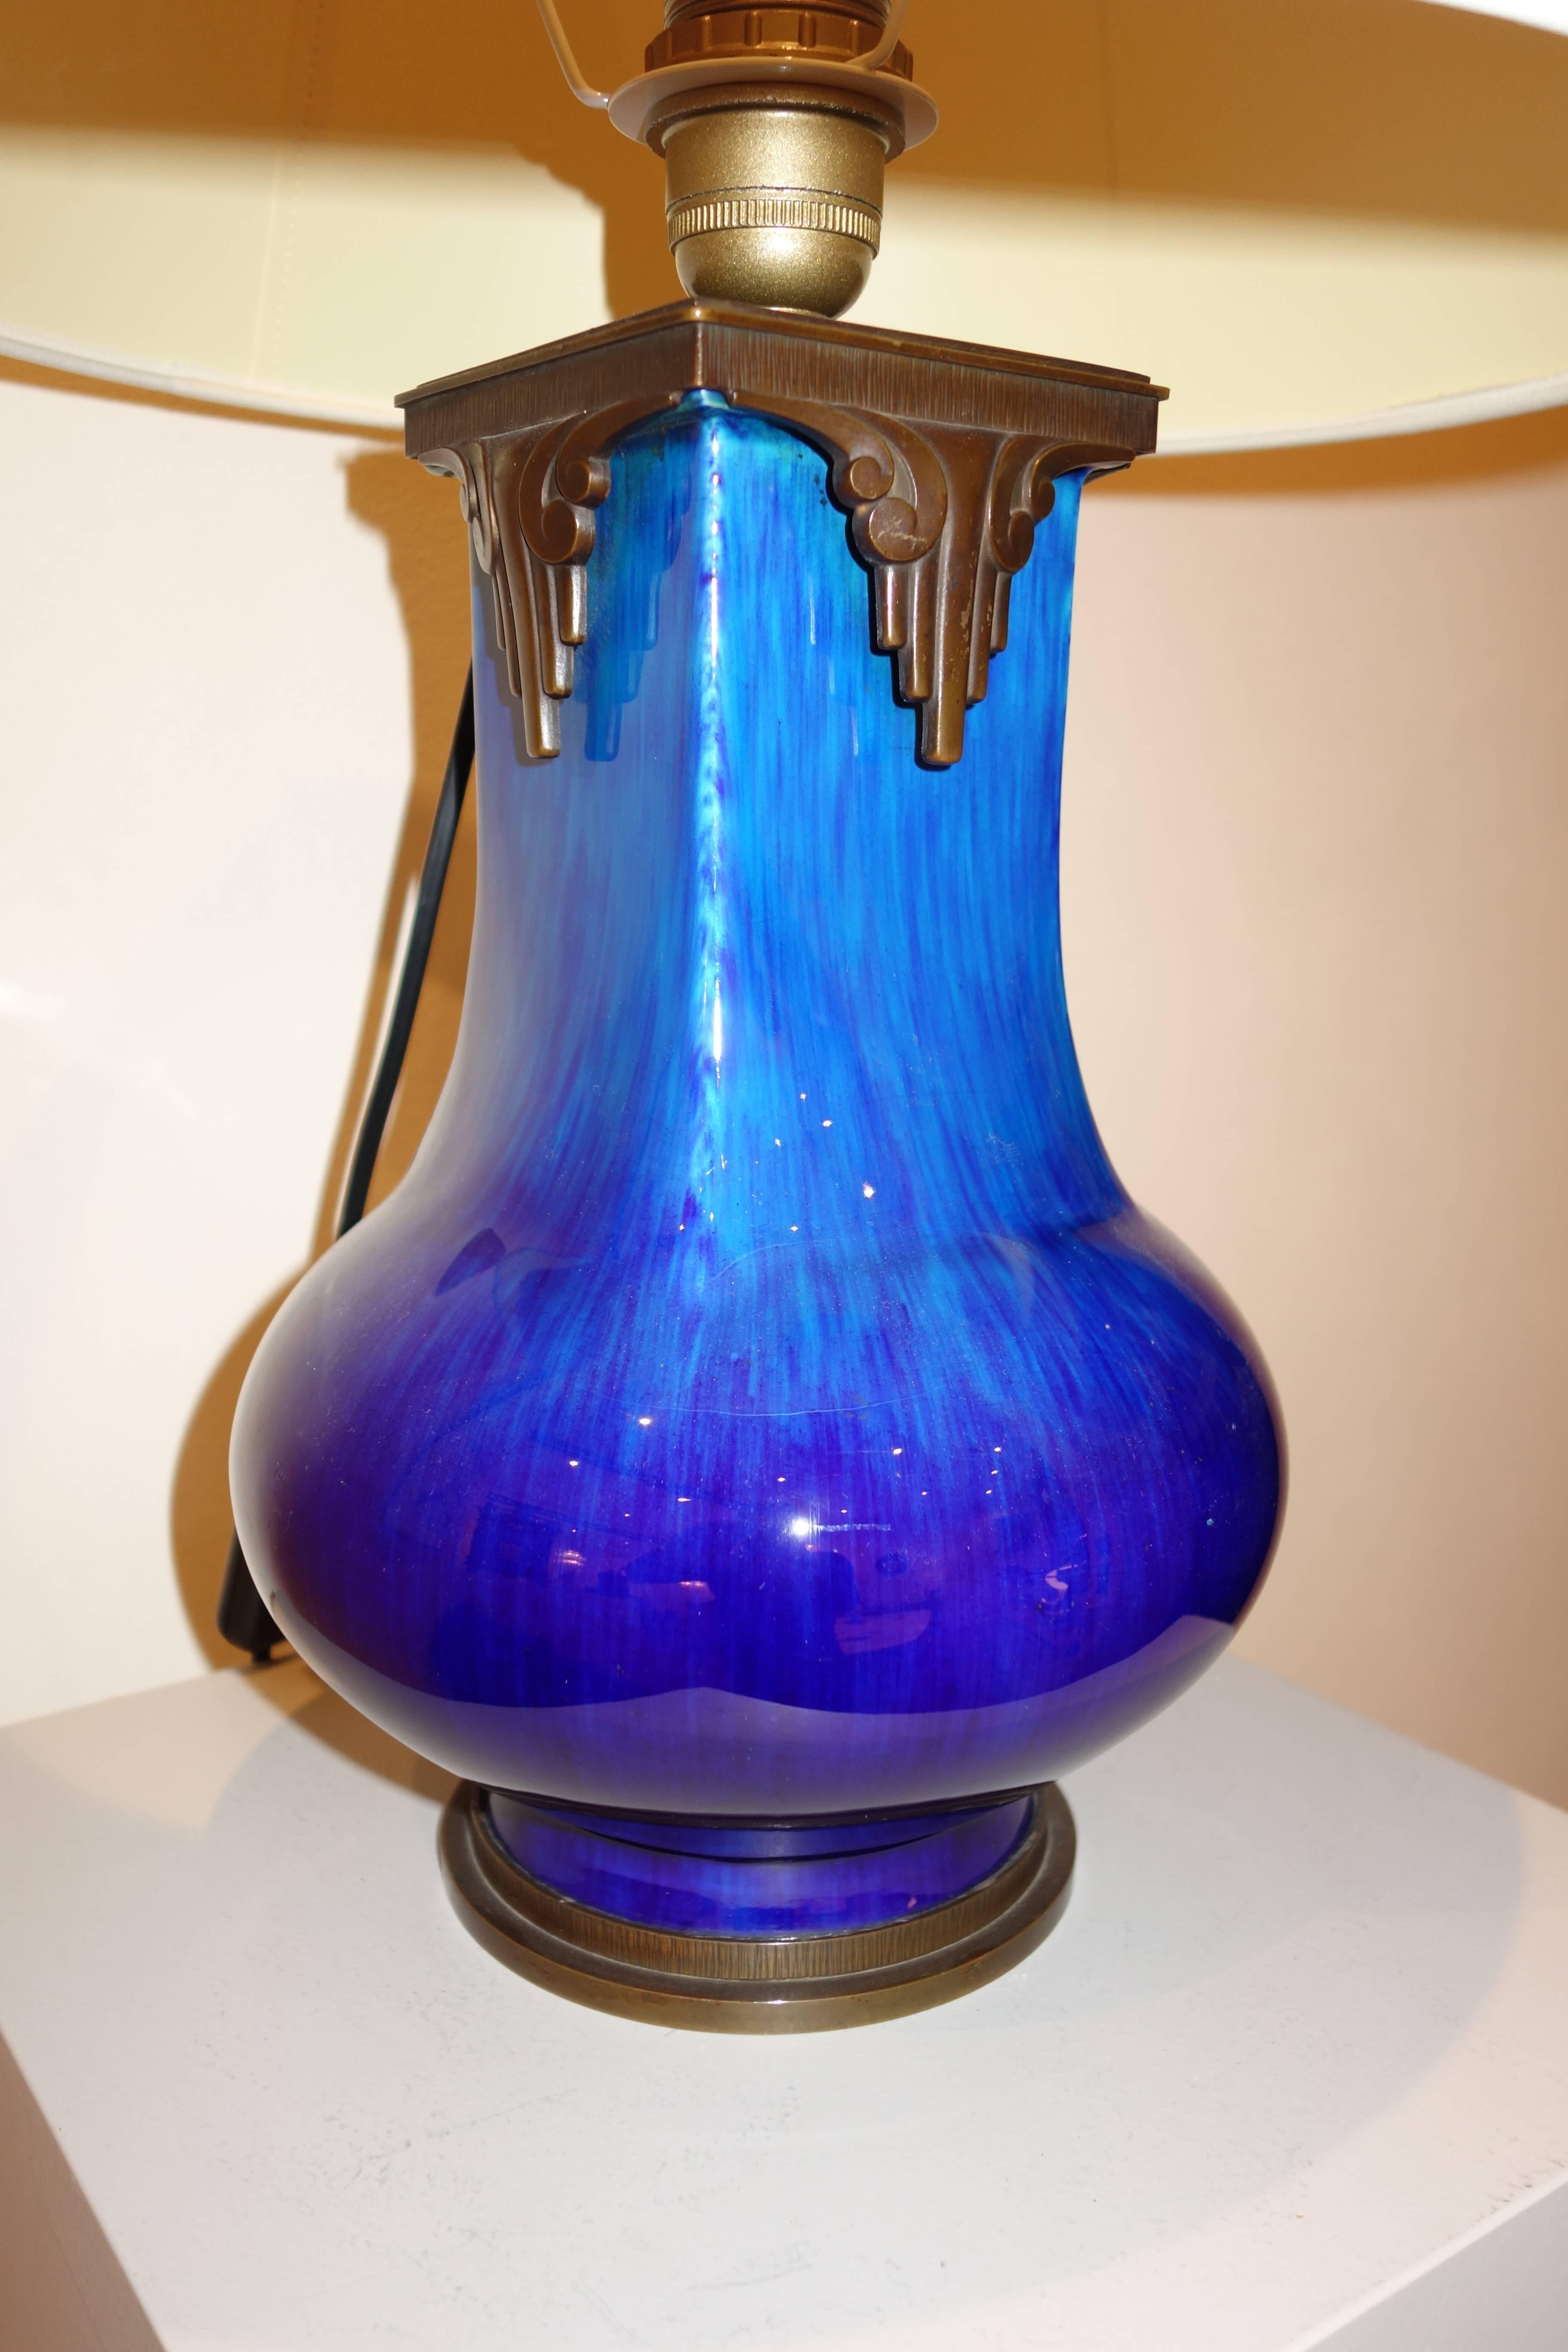 French Splendid Faience De Sèvres Art Deco Lamp Mounted with Bronze, circa 1920s For Sale